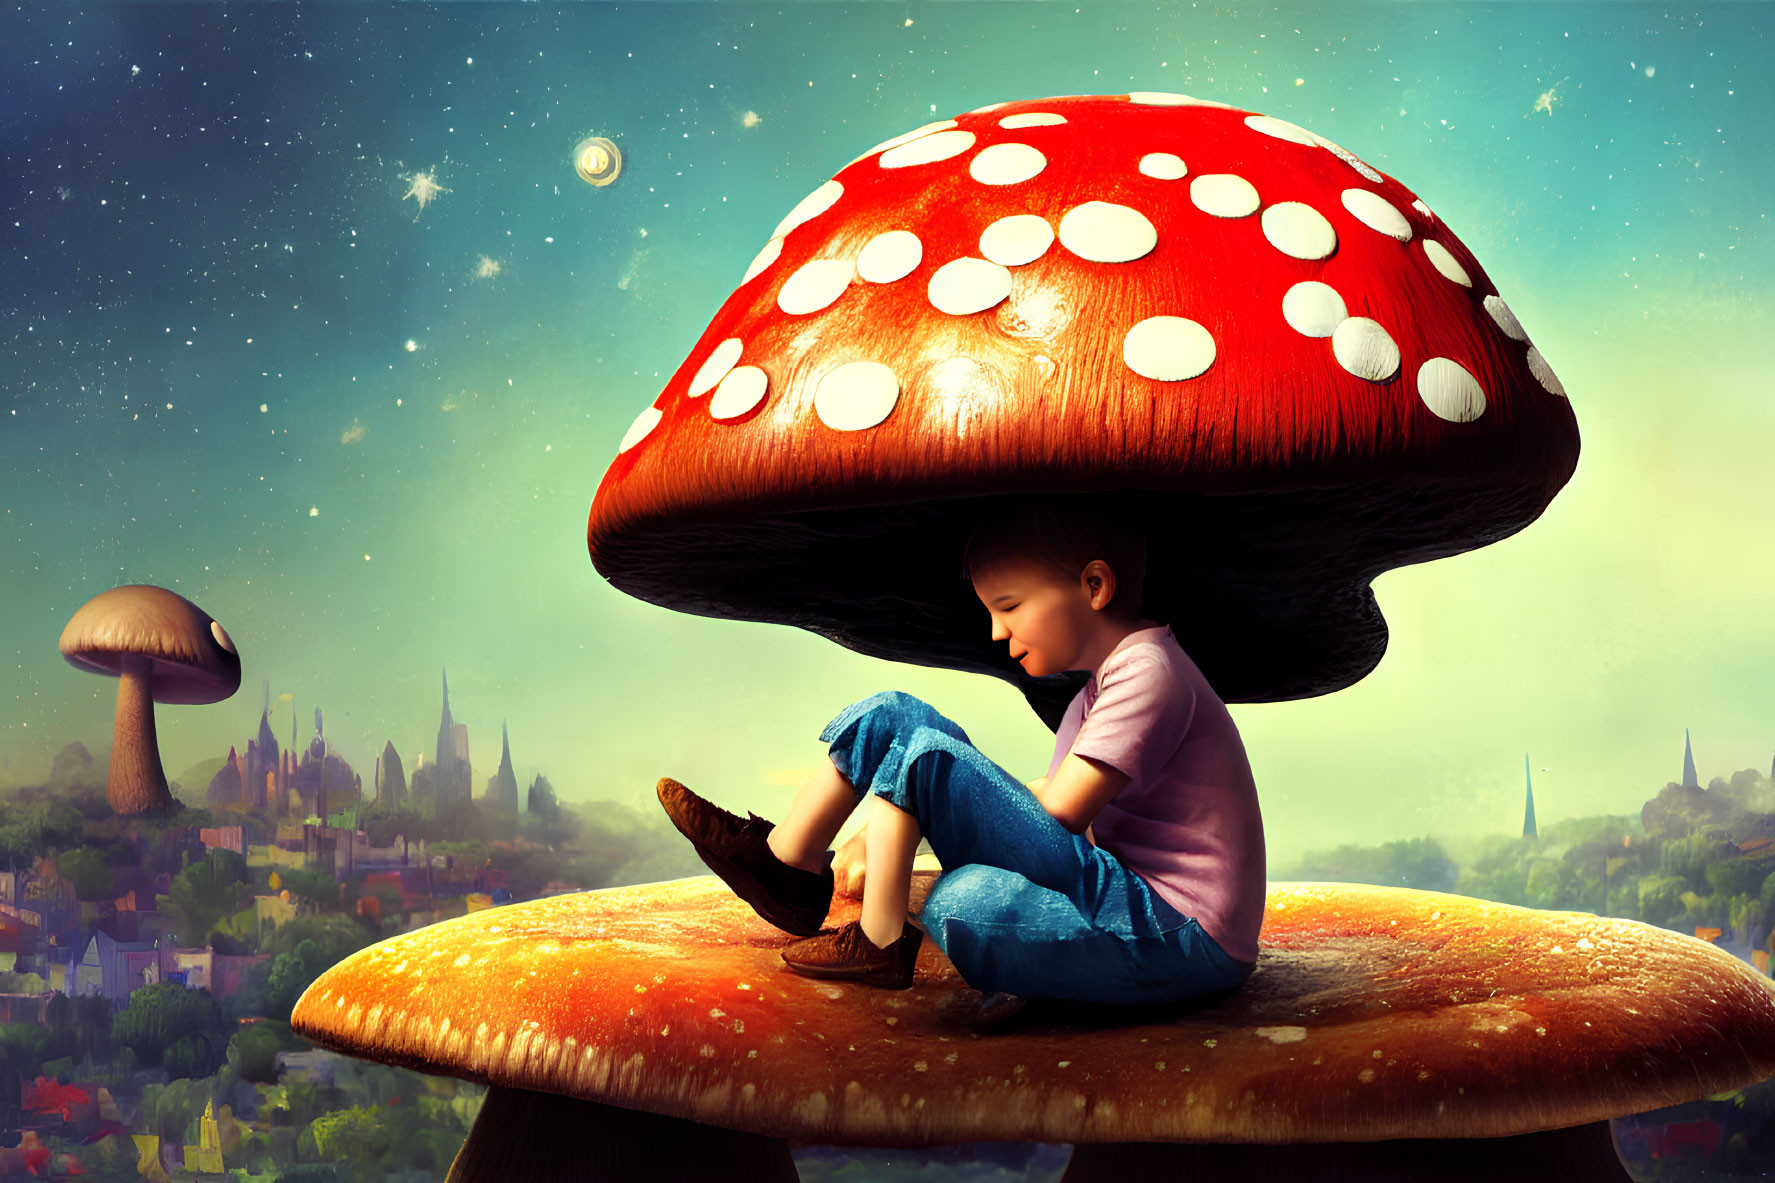 Child Contemplating Under Giant Red Mushroom in Whimsical Landscape